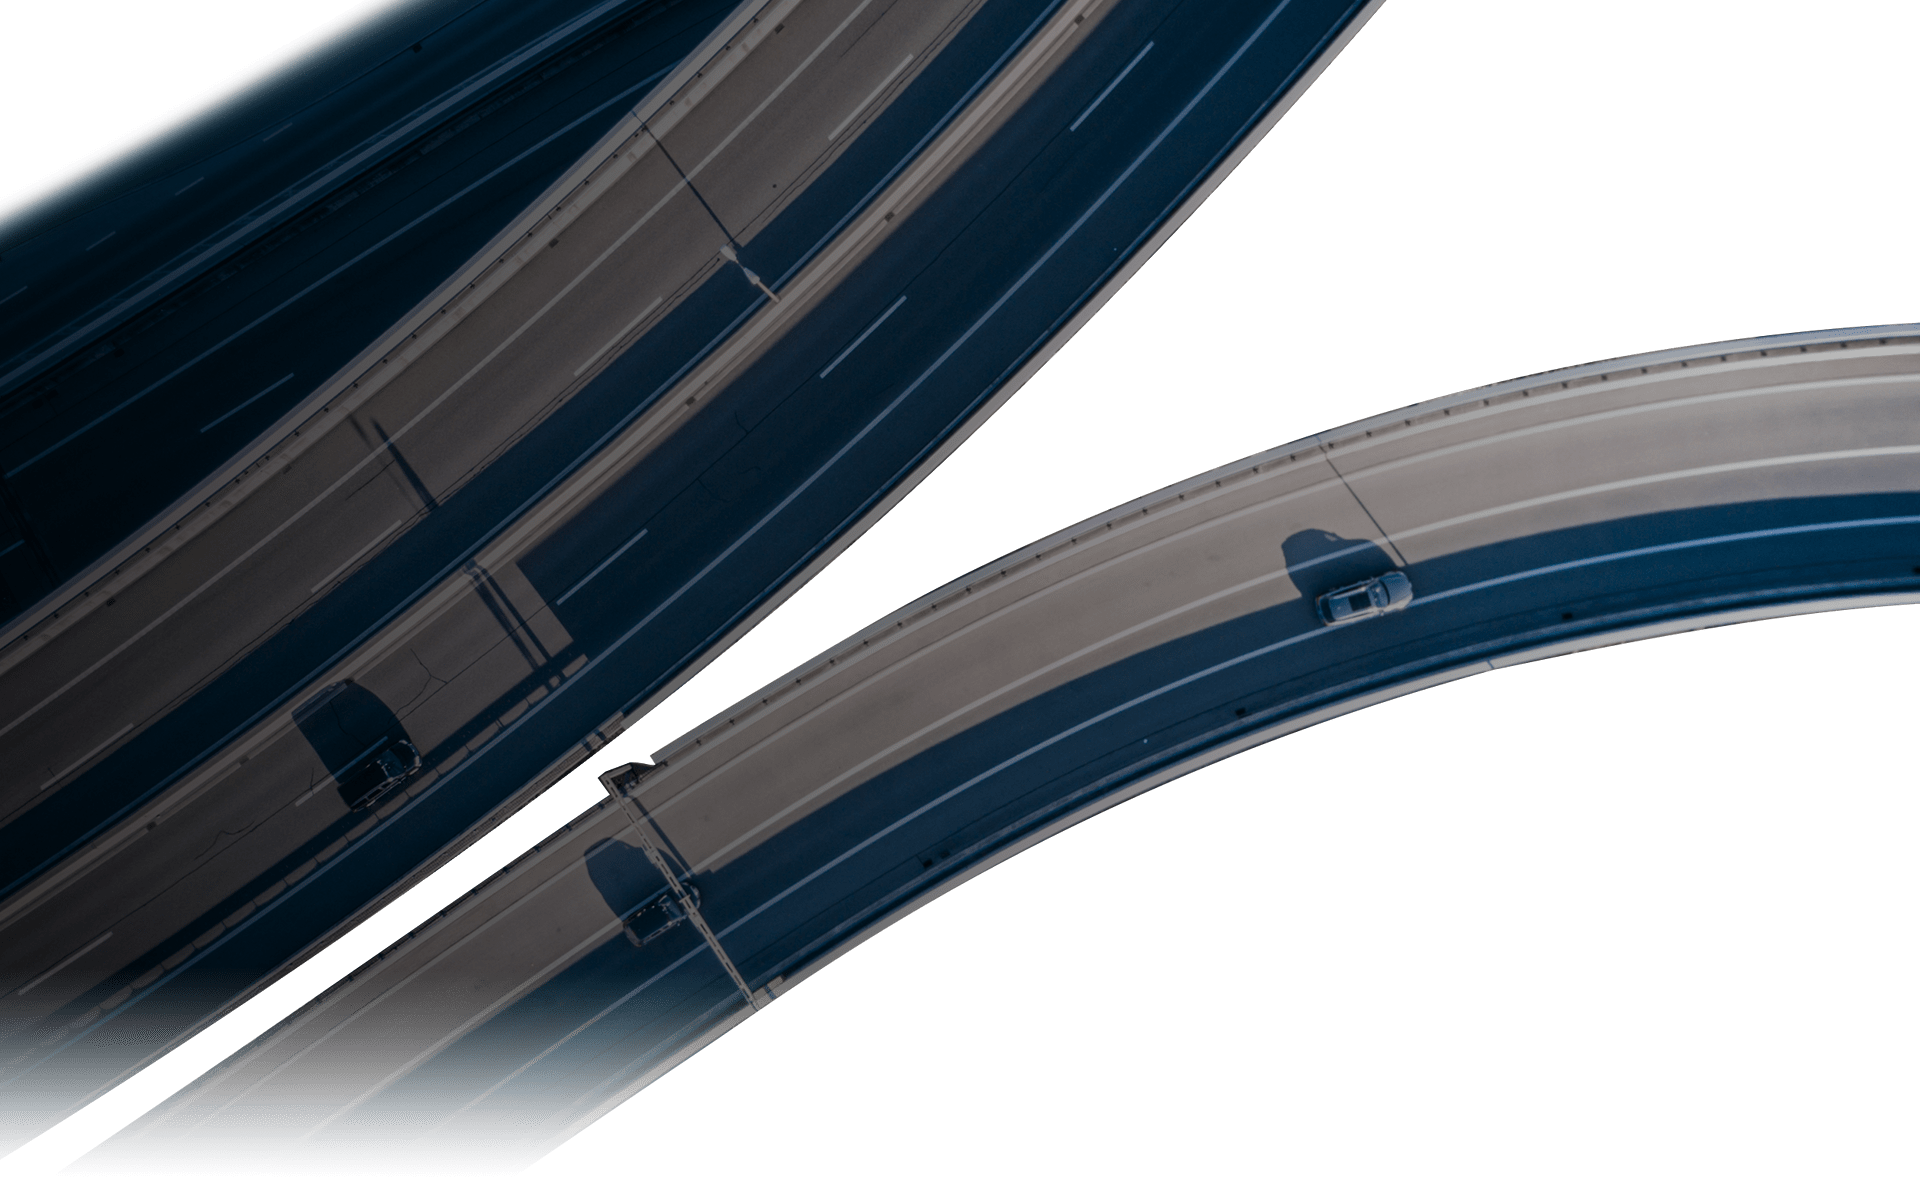 overhead view of vehicles on a highway junction with electric blue line along the path of an exiting vehicle that abstractly indicating the GPS direction